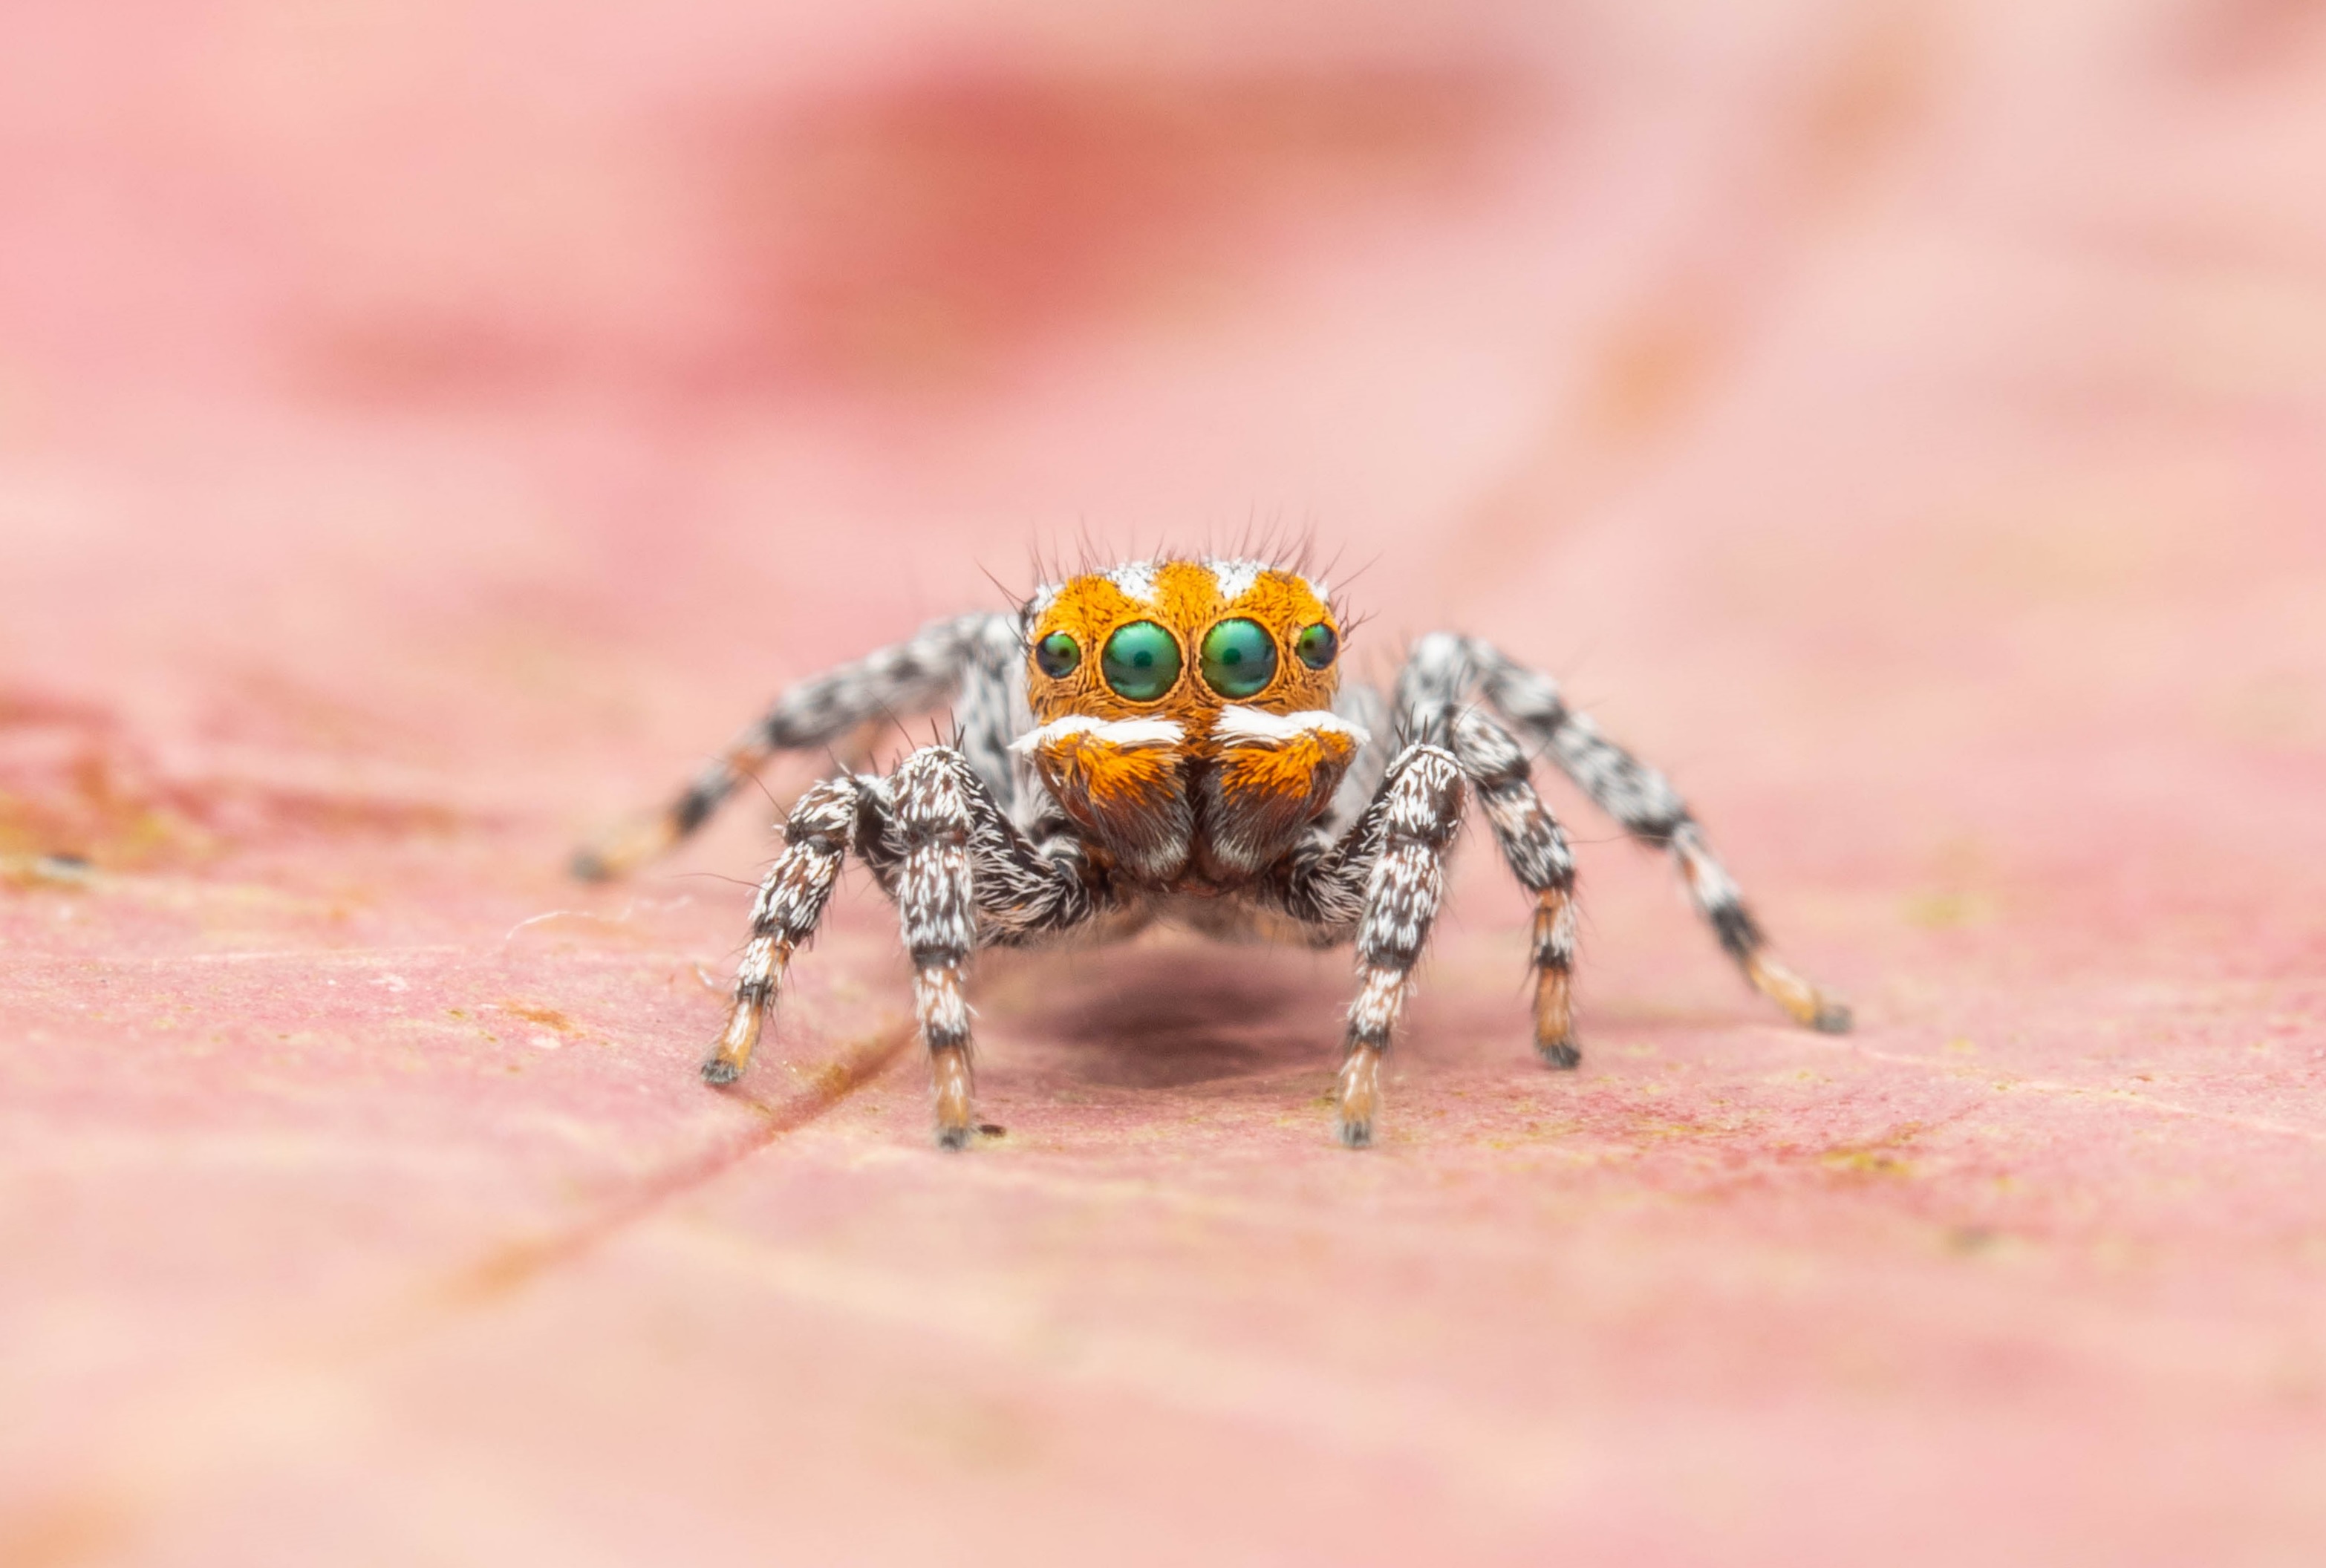 A peakcock spider, with green eyes and black-and-white striped legs